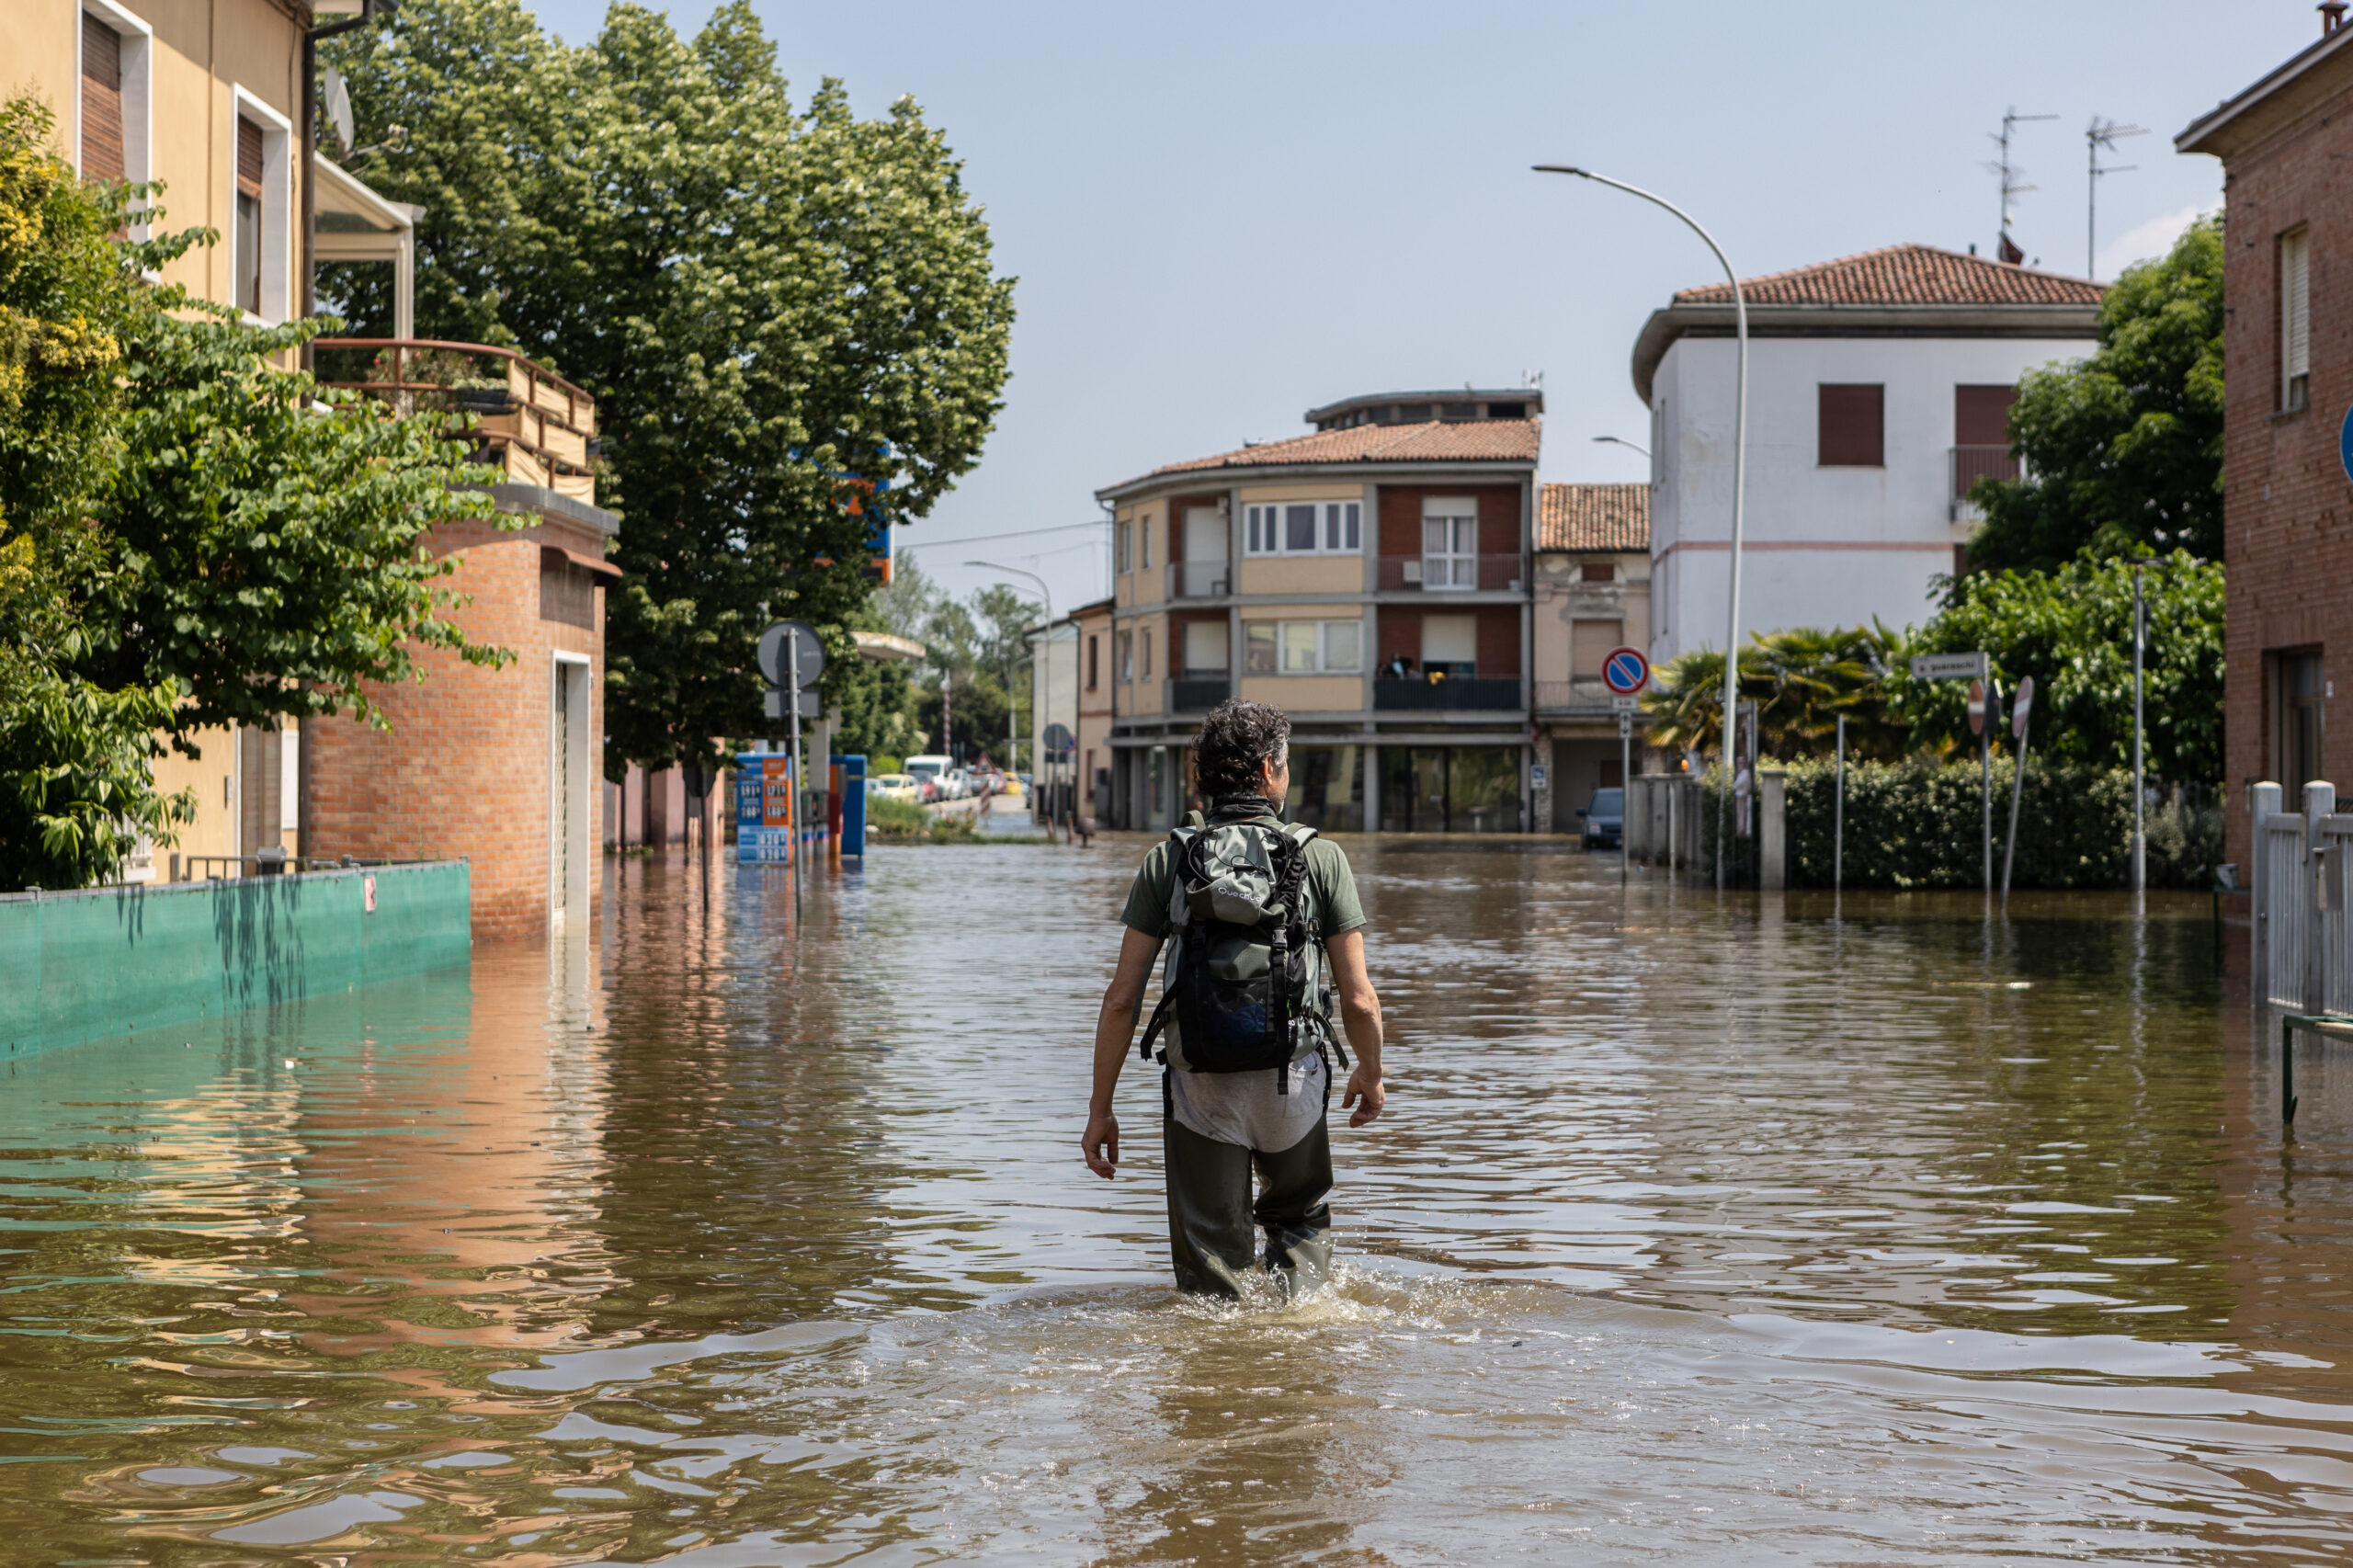 Italy | Floods increasing in frequency and impact